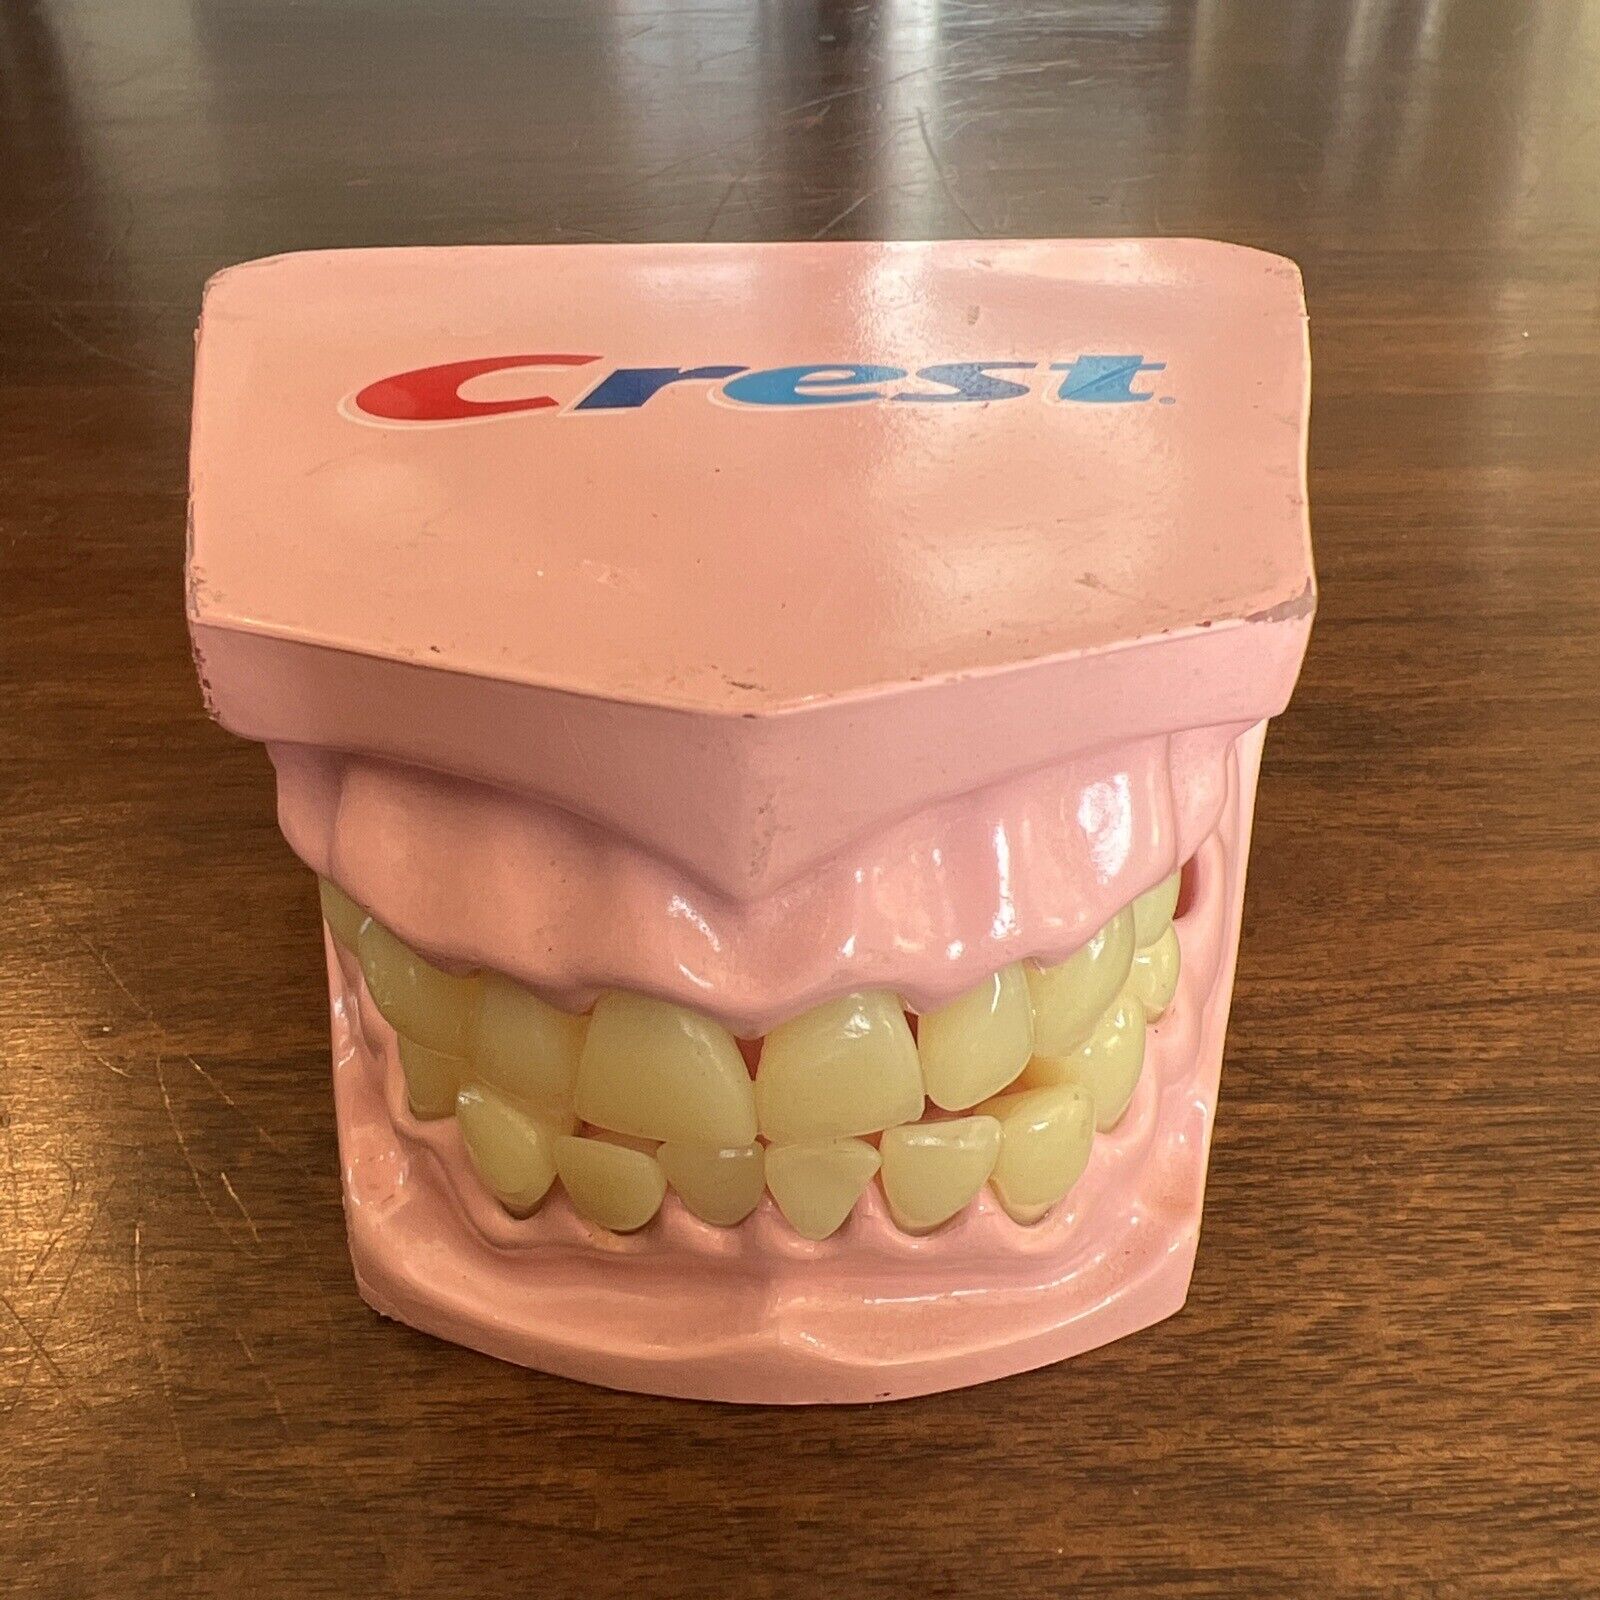 CREST TOOTHPASTE MEDICAL ARTS TOOTH MOUTH FIGURE